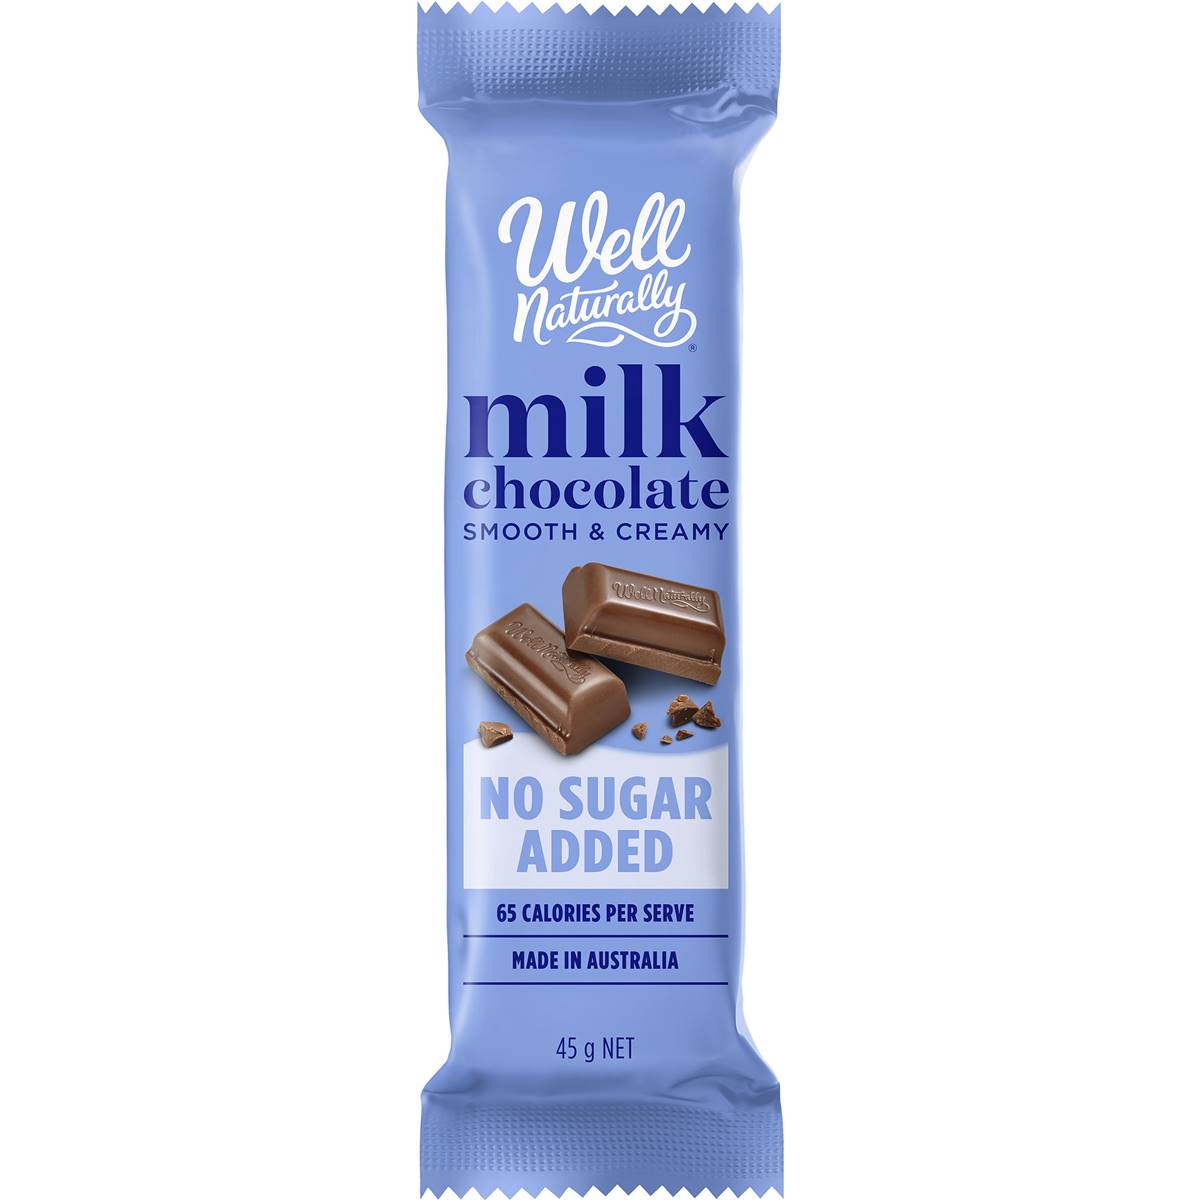 Calories in Well Naturally No Sugar Added Milk Choc Bar